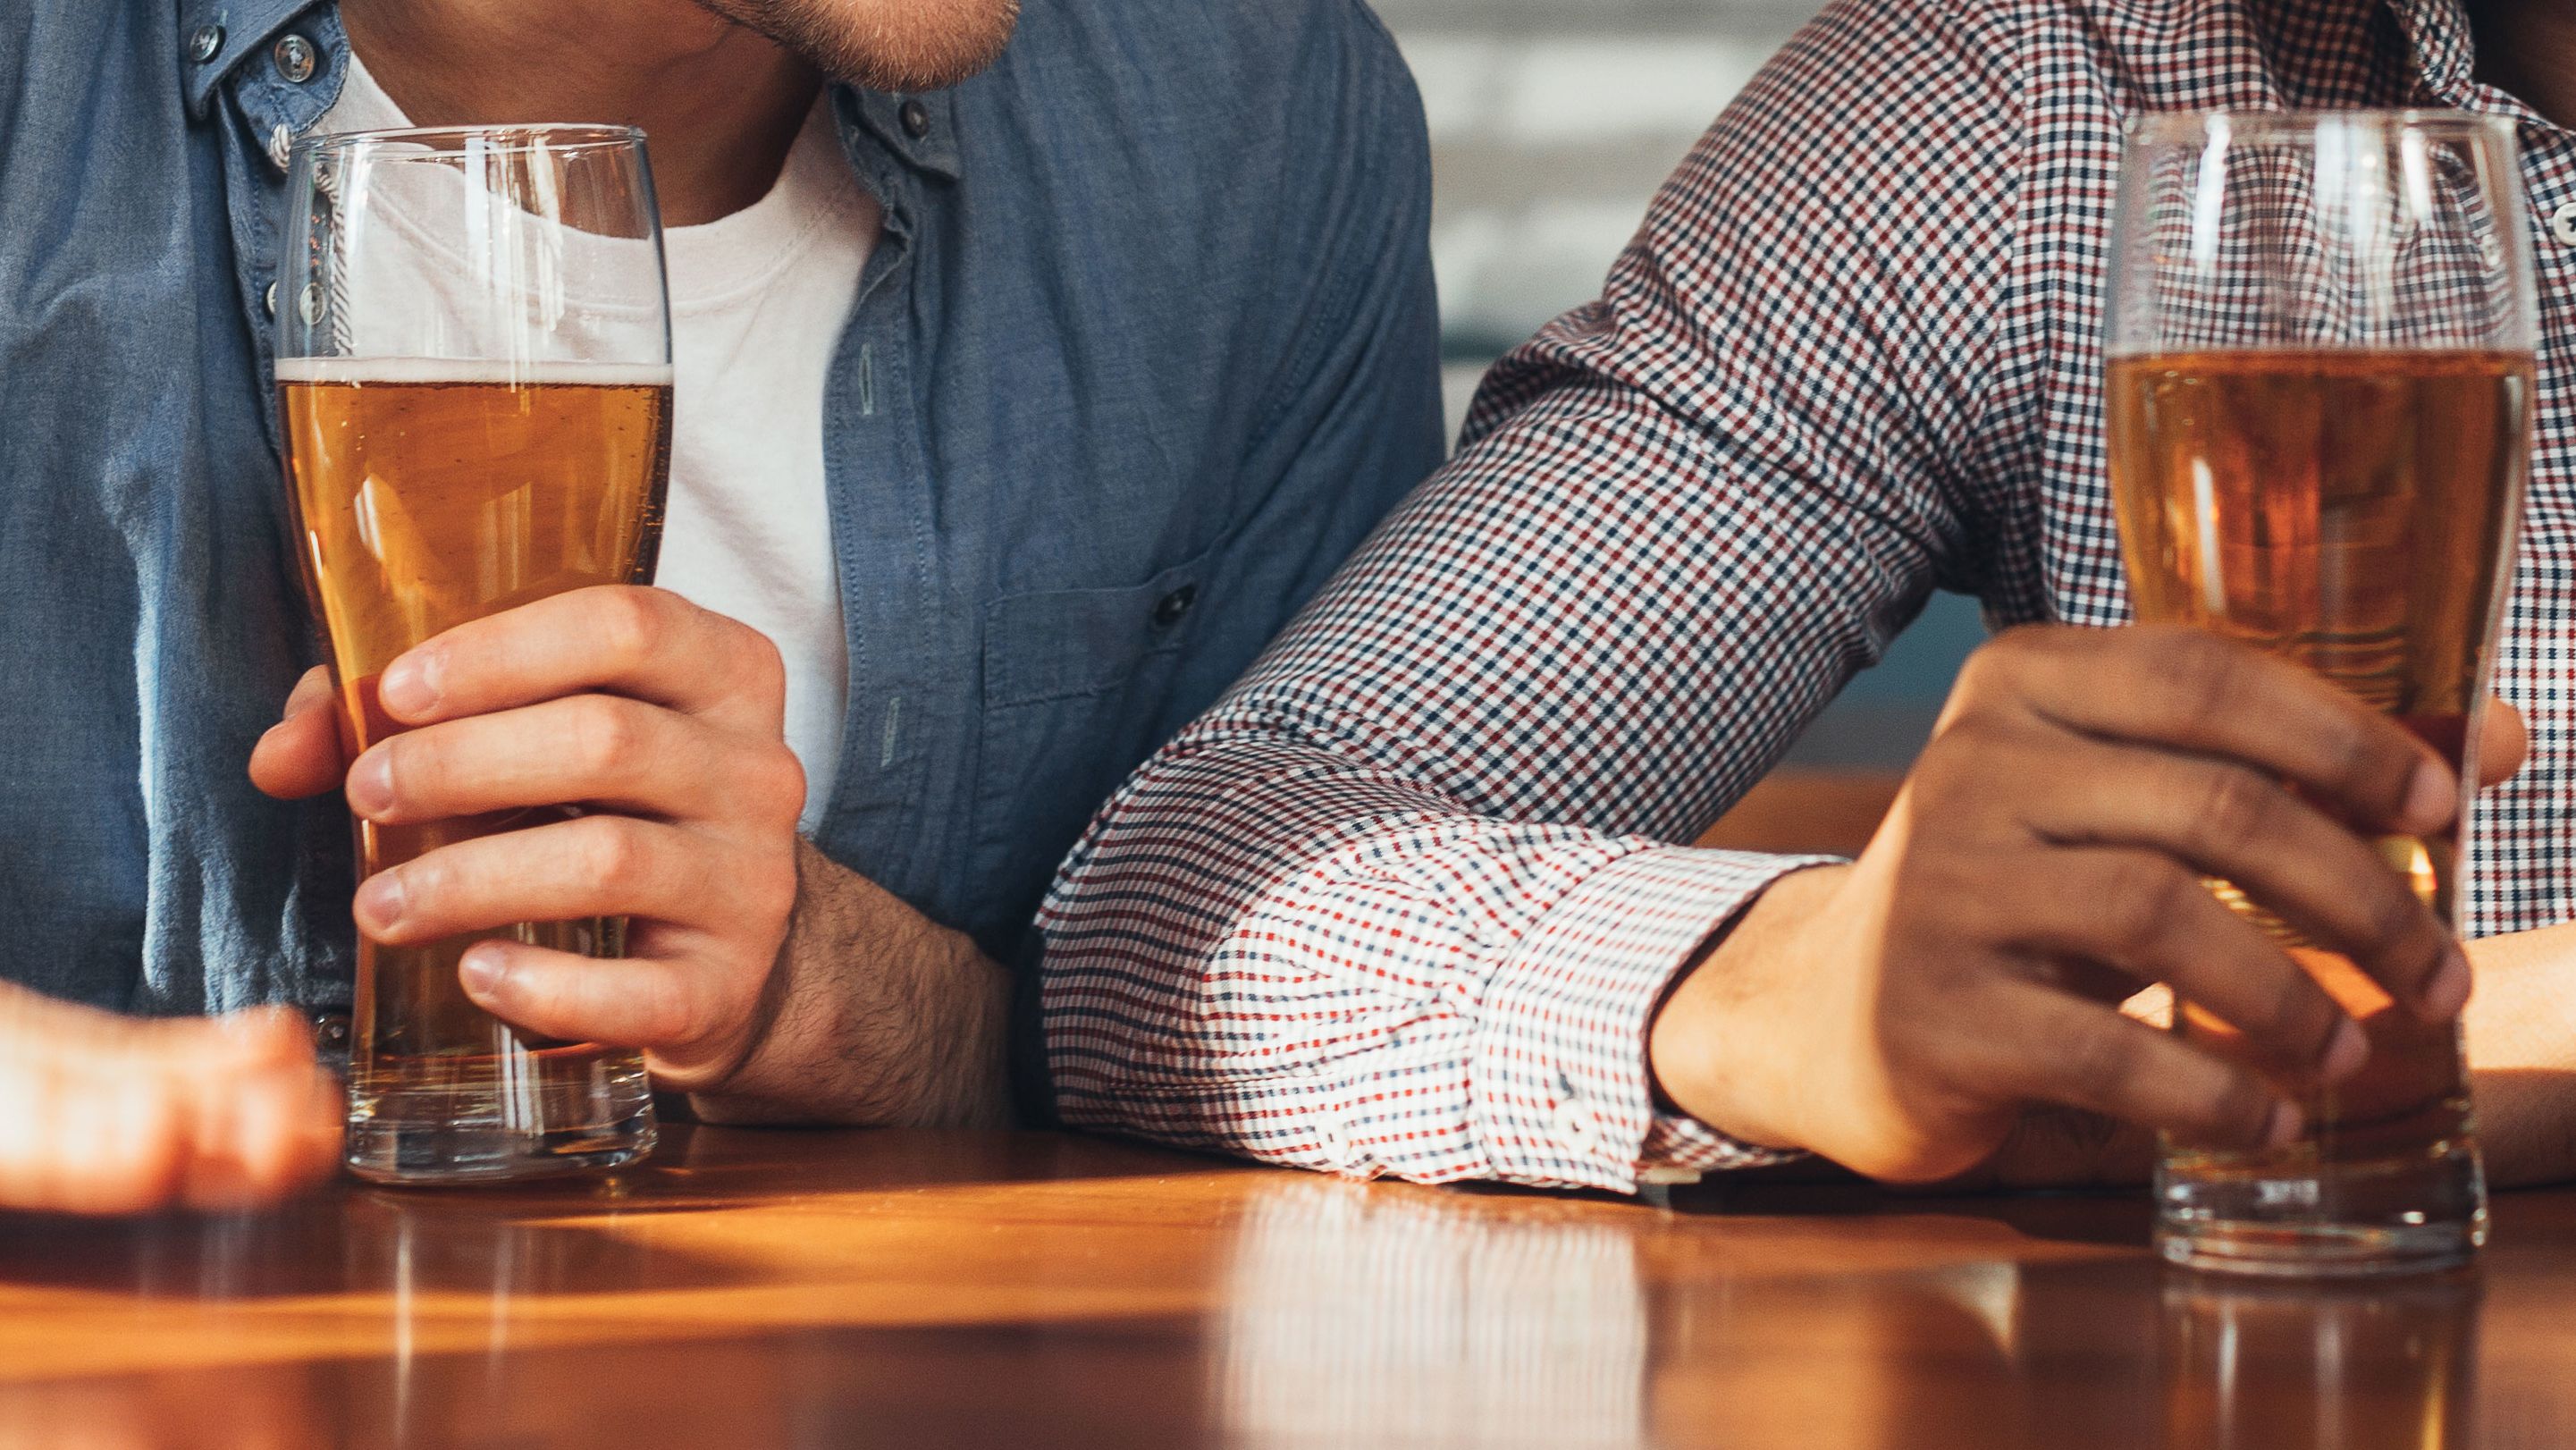 Drinking alcohol doesn't provide any health benefits to people under 40 but raises the risk of injury, the study said.